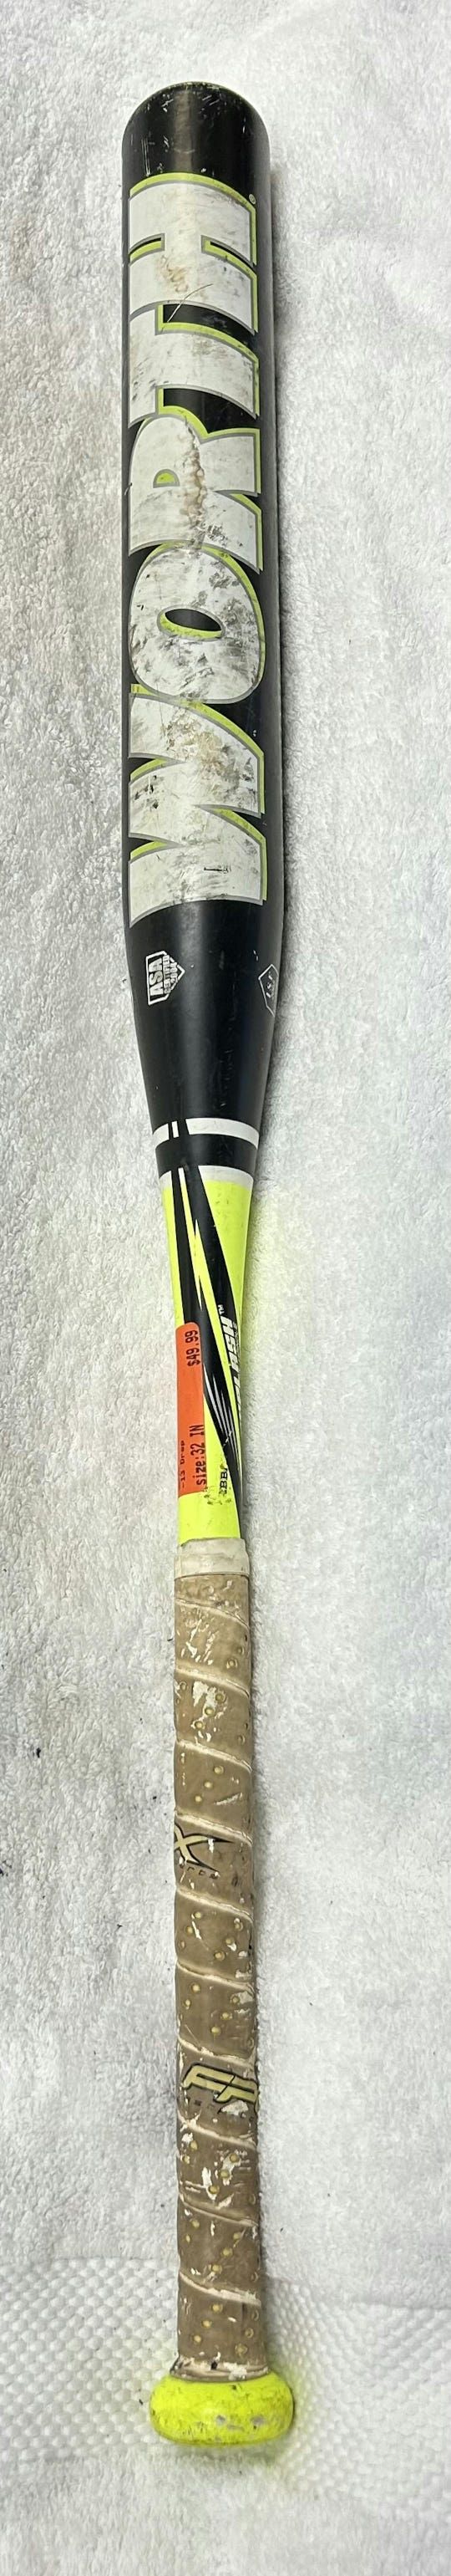 Used Worth Fplstm 32" -13 Drop Fastpitch Bats